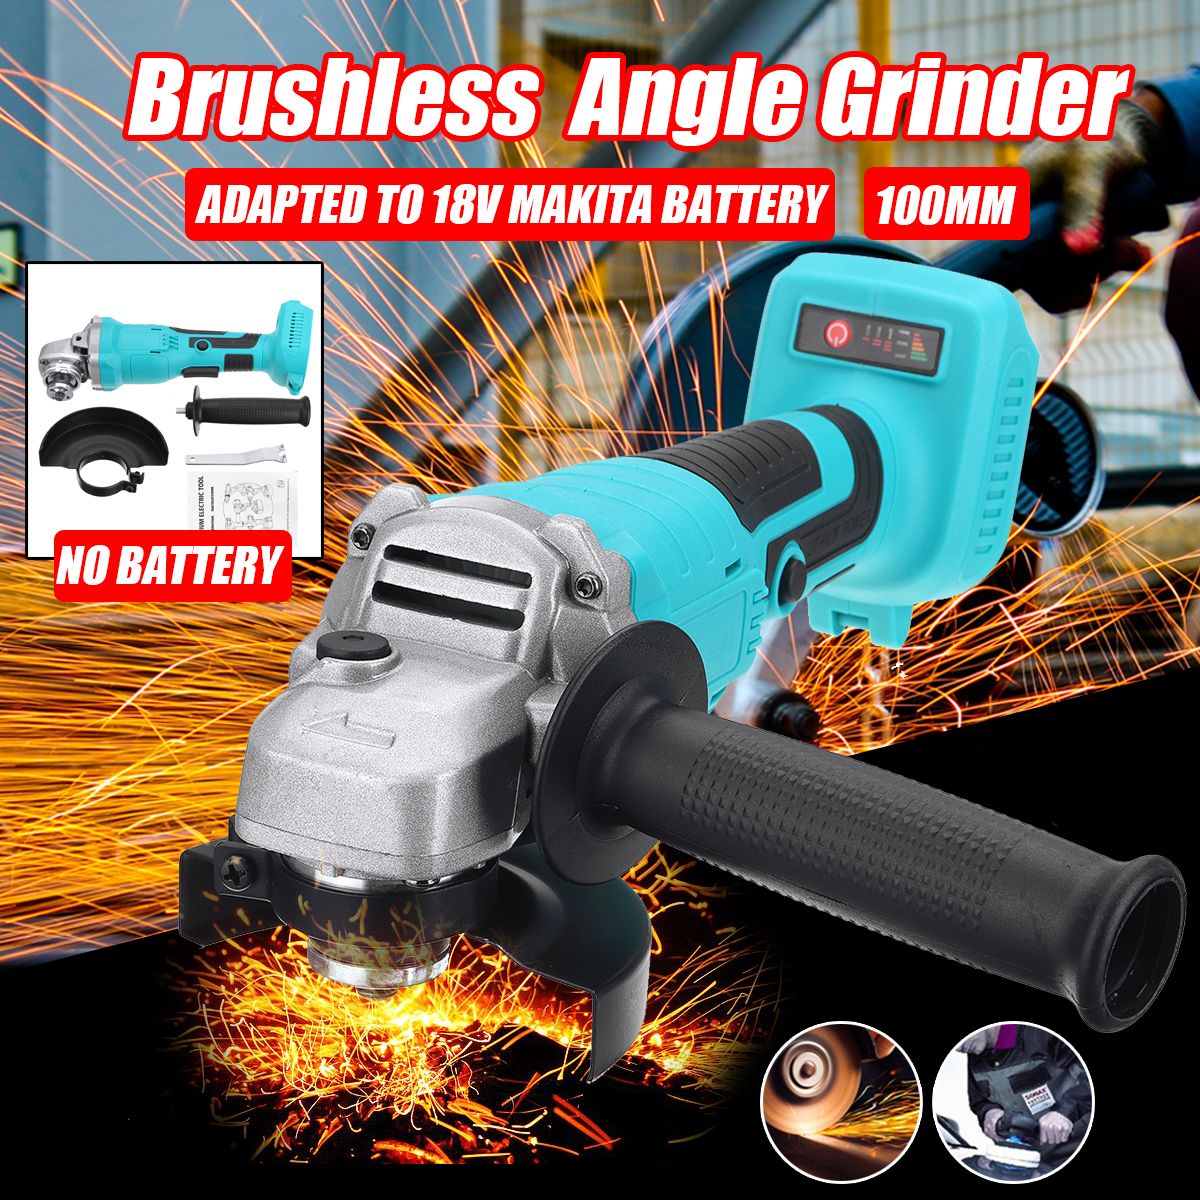 100mm-4-Brushless-Cordless-Electric-Angle-Grinder-Replace-For-18V-Makita-Li-ion-Battery-1644274